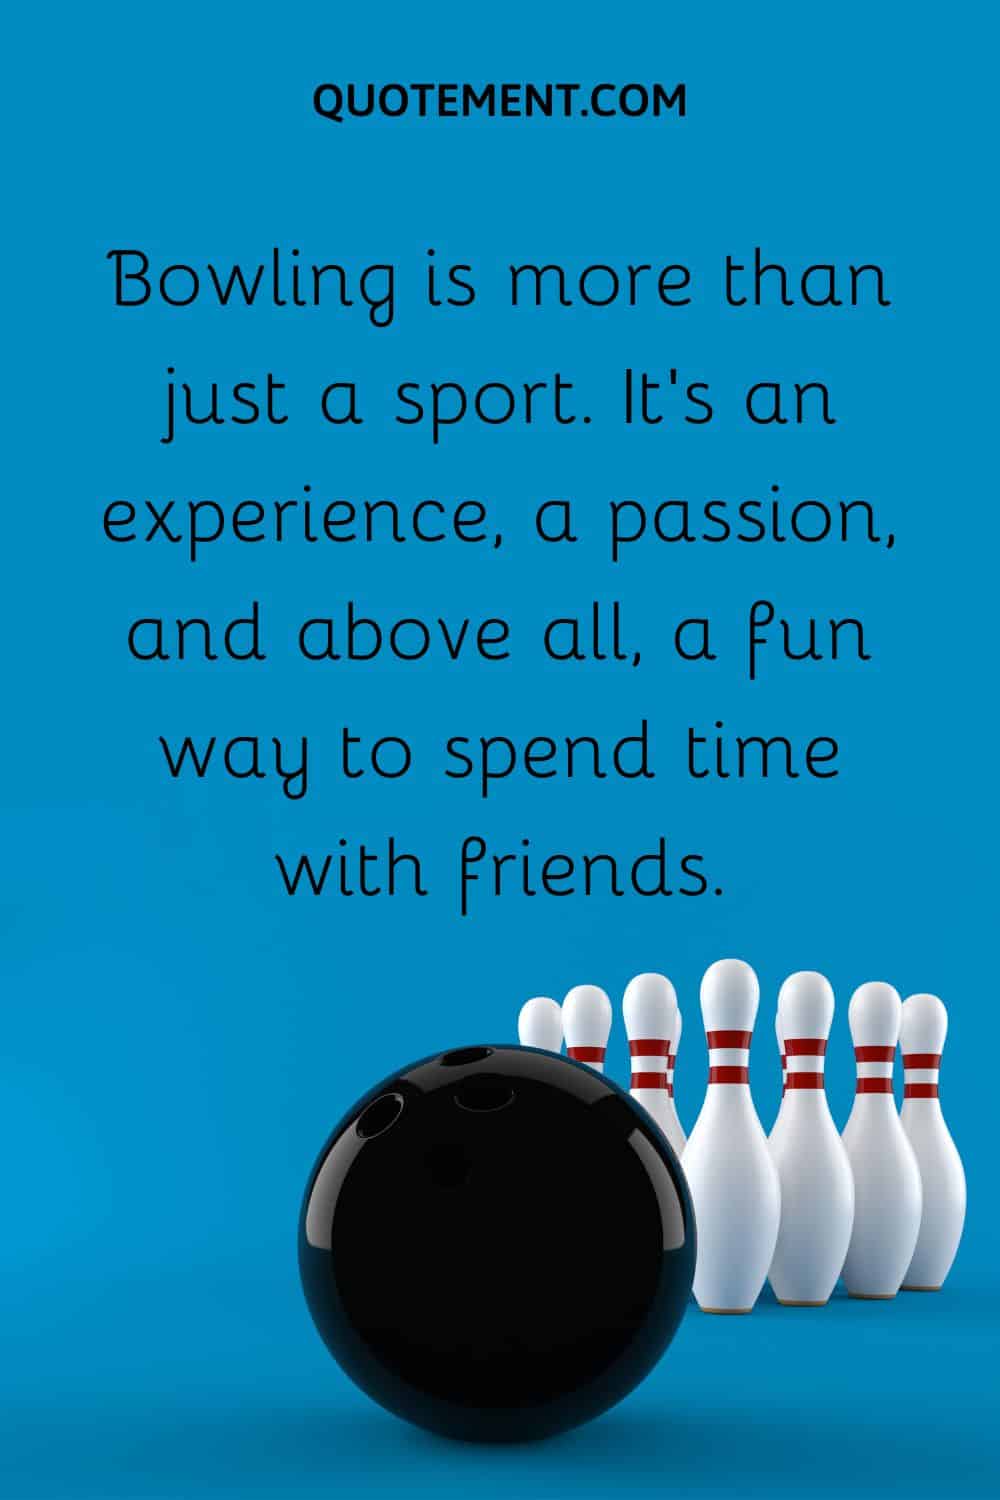 Bowling is more than just a sport